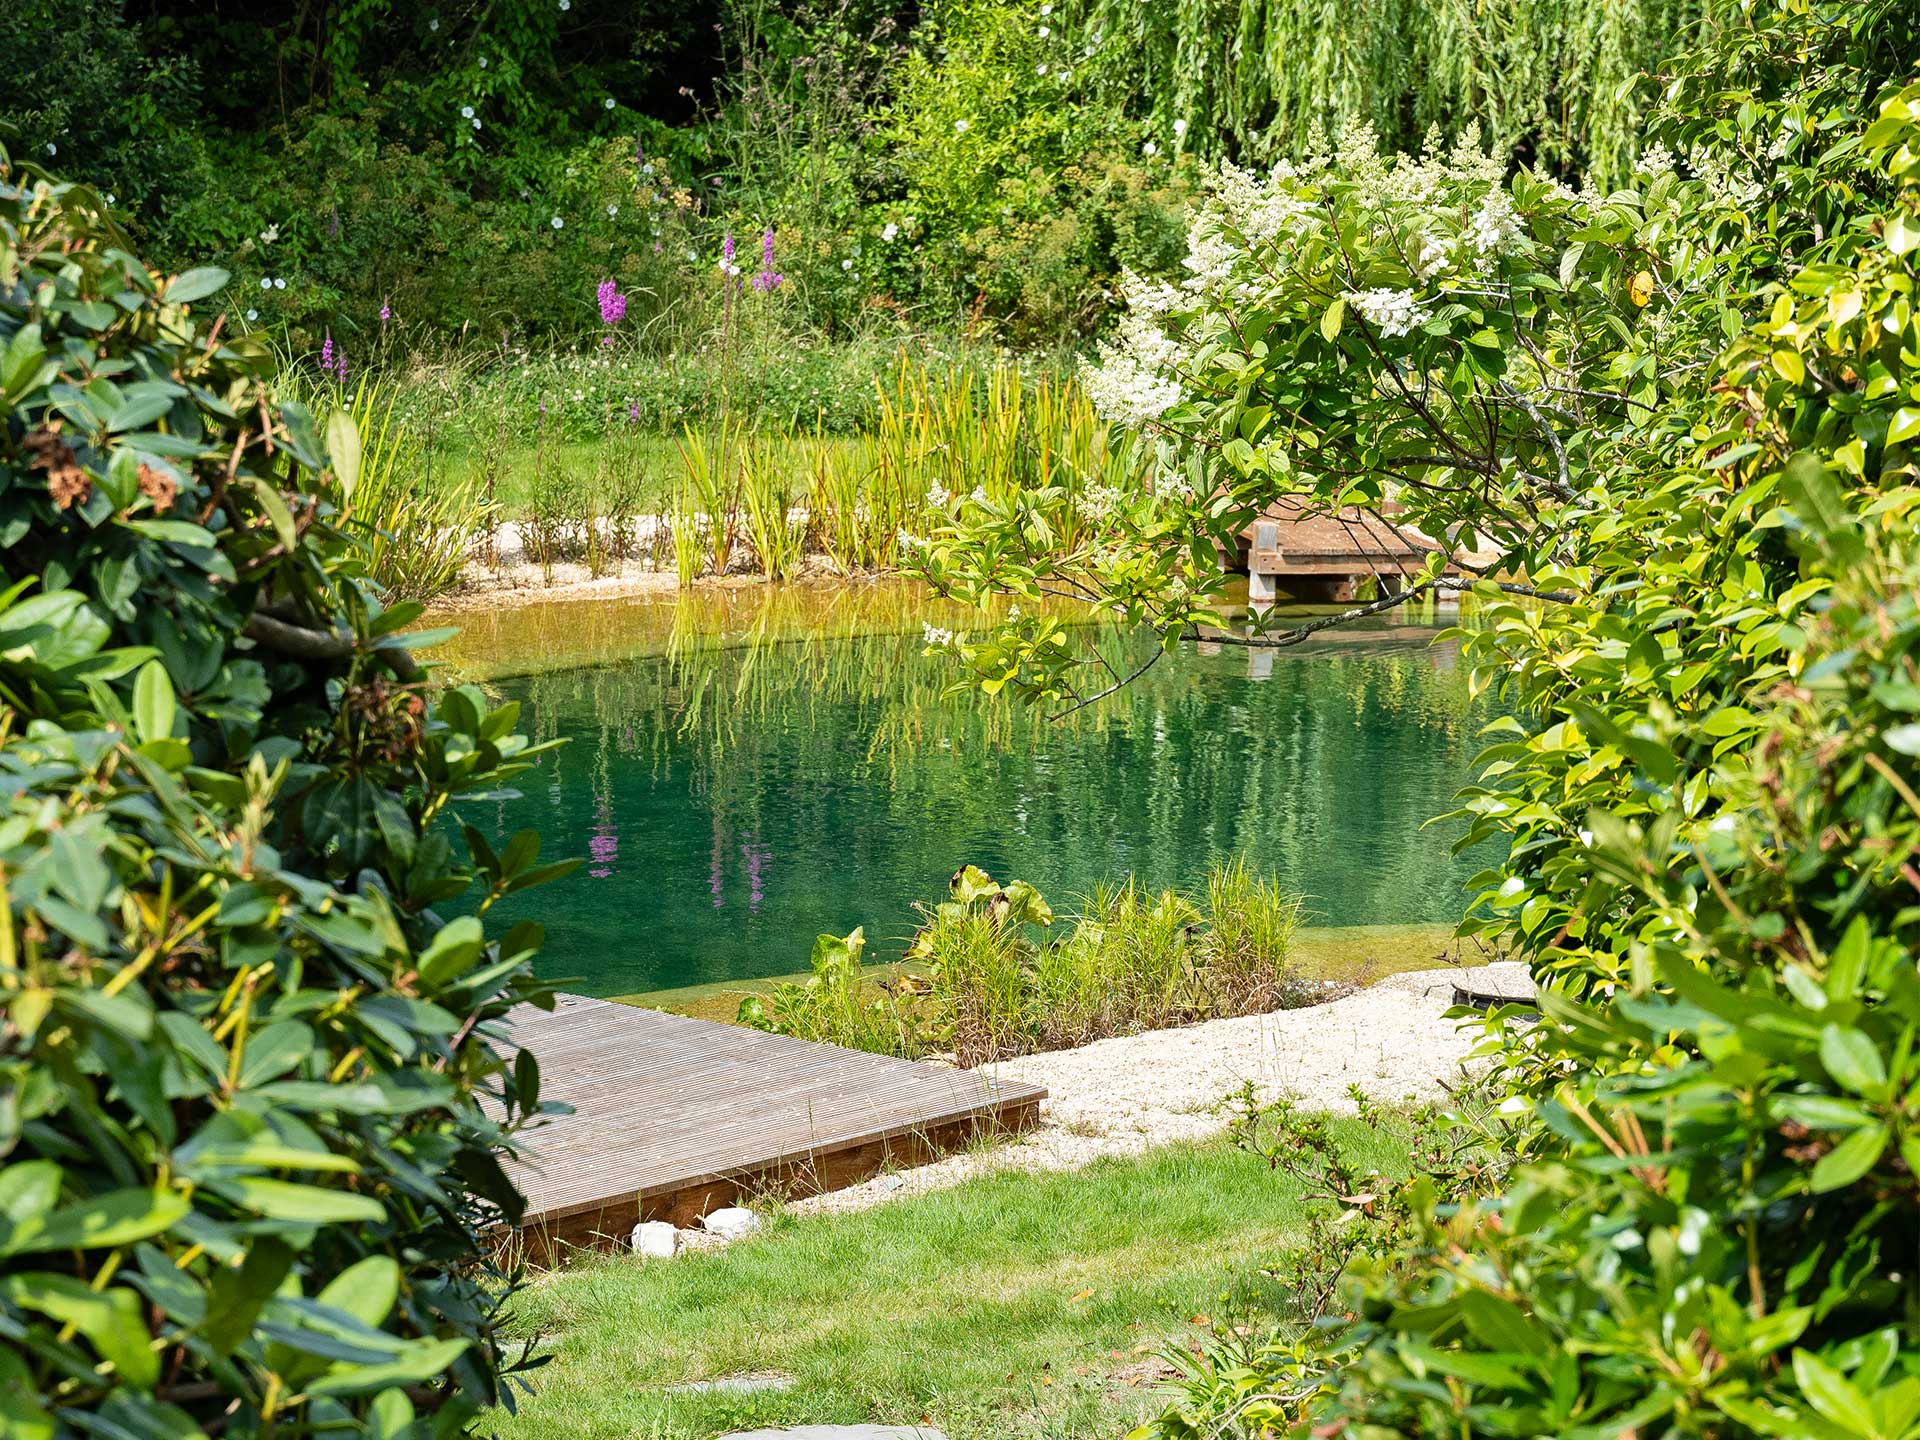 Create a secret hideaway in the garden with a natural swimming pond